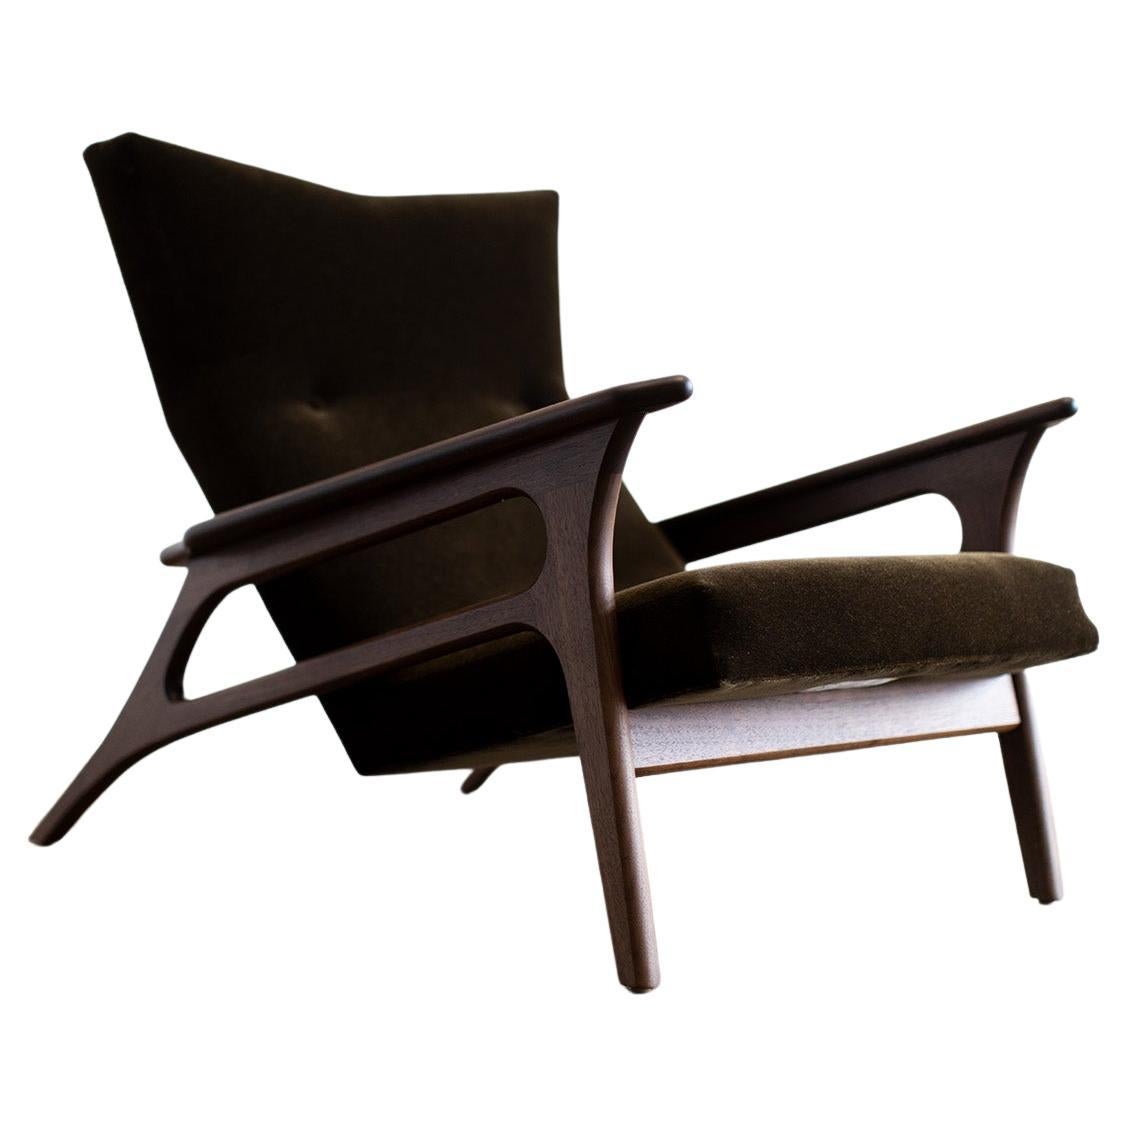 Paralax Lounge Chair, Walnut and Brown Mohair, for Craft Associates